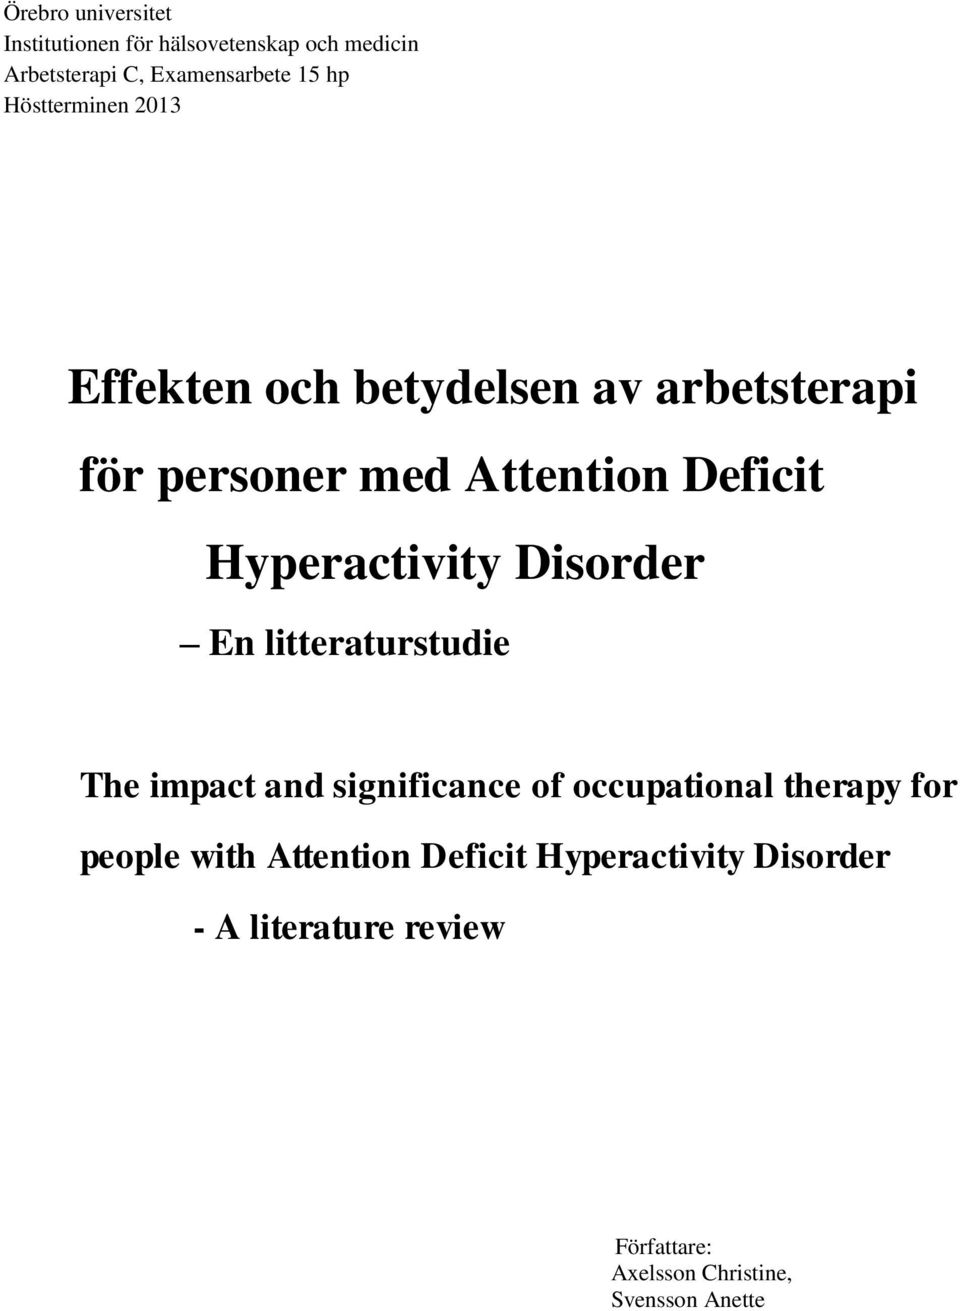 Hyperactivity Disorder En litteraturstudie The impact and significance of occupational therapy for